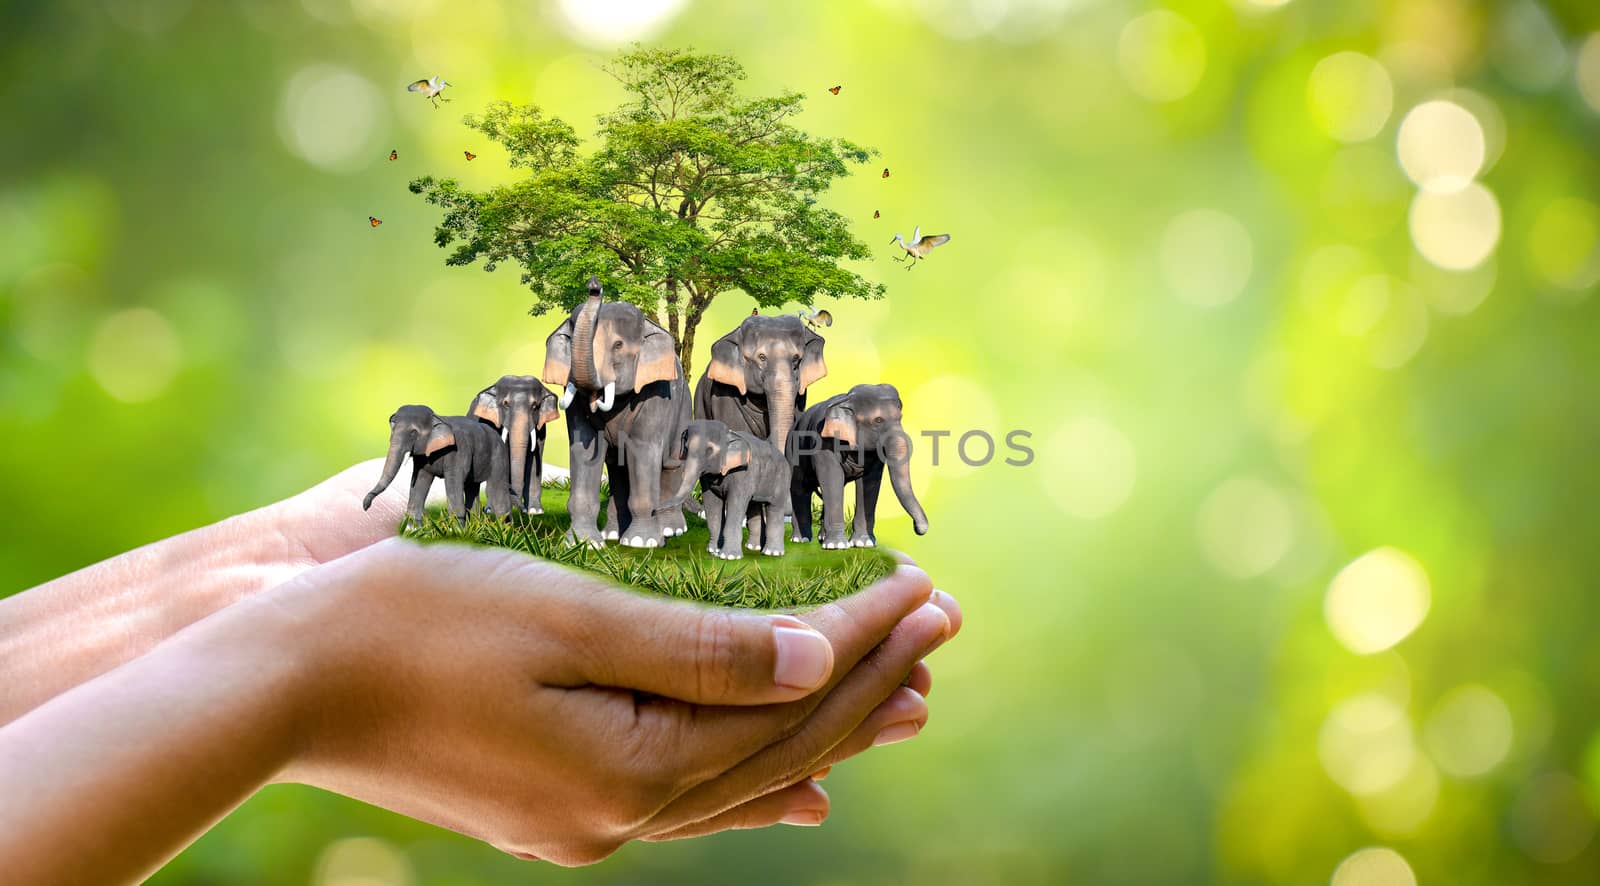 Concept Nature reserve conserve Wildlife reserve tiger Deer Global warming Food Loaf Ecology Human hands protecting the wild and wild animals tigers deer, trees in the hands green background Sun light by sarayut_thaneerat